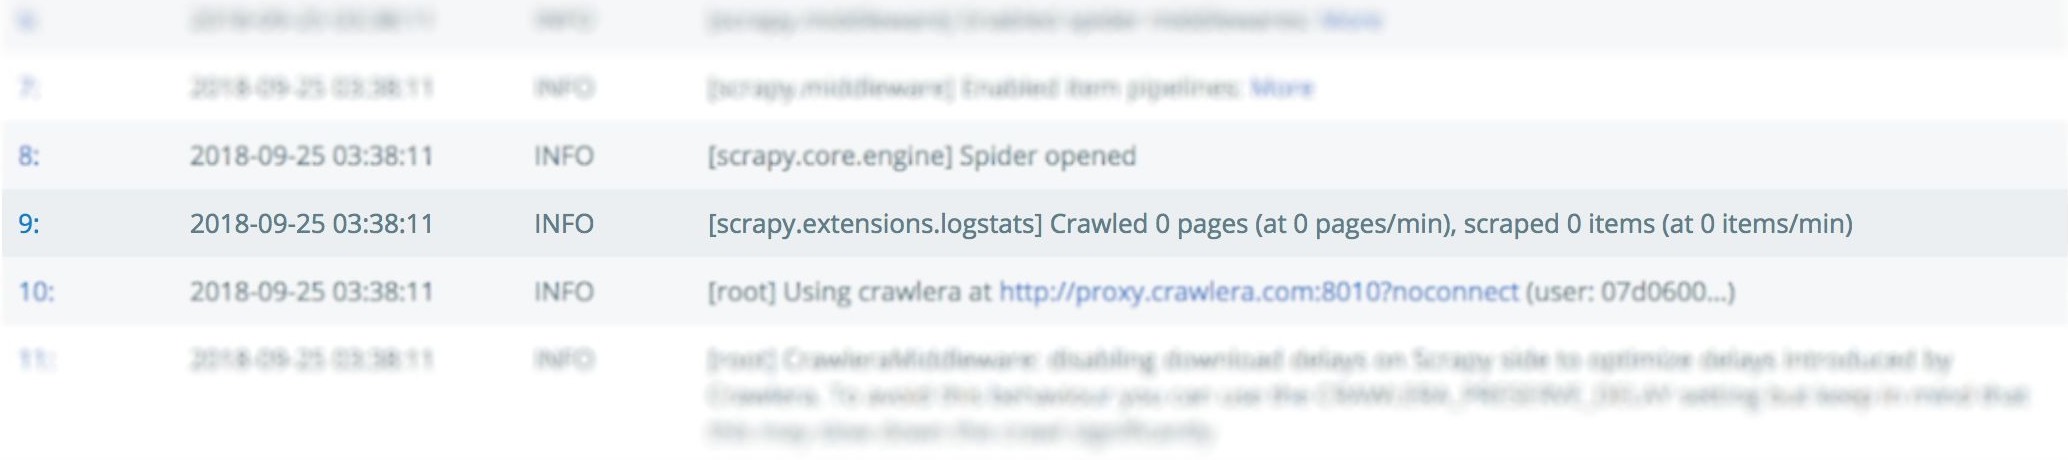 0 Pages Crawled